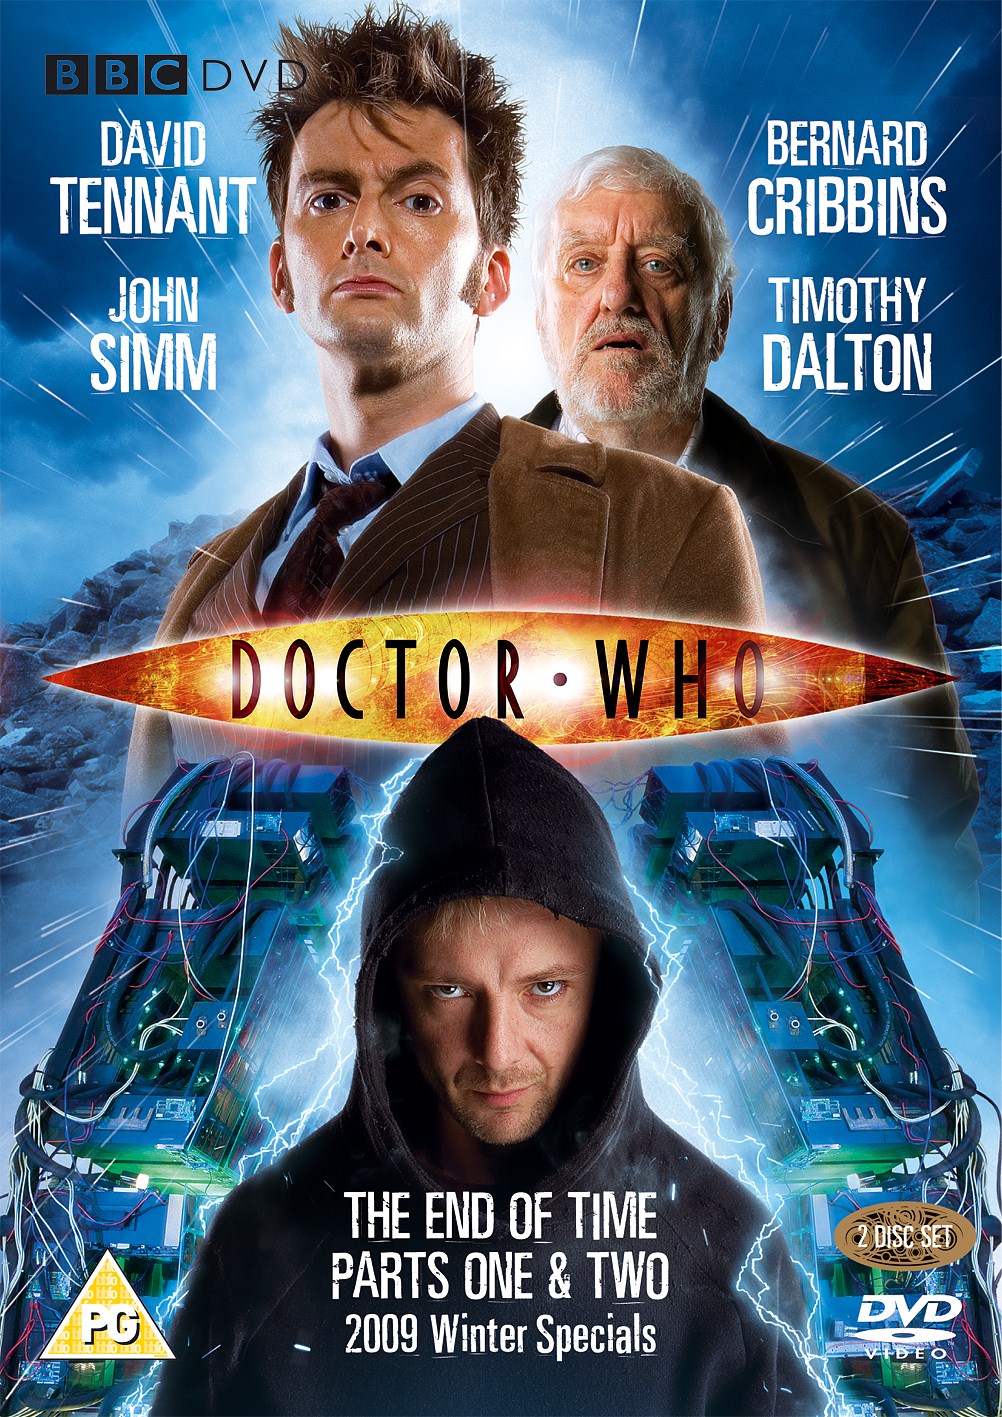 The End of Time DVD Region 2 UK cover